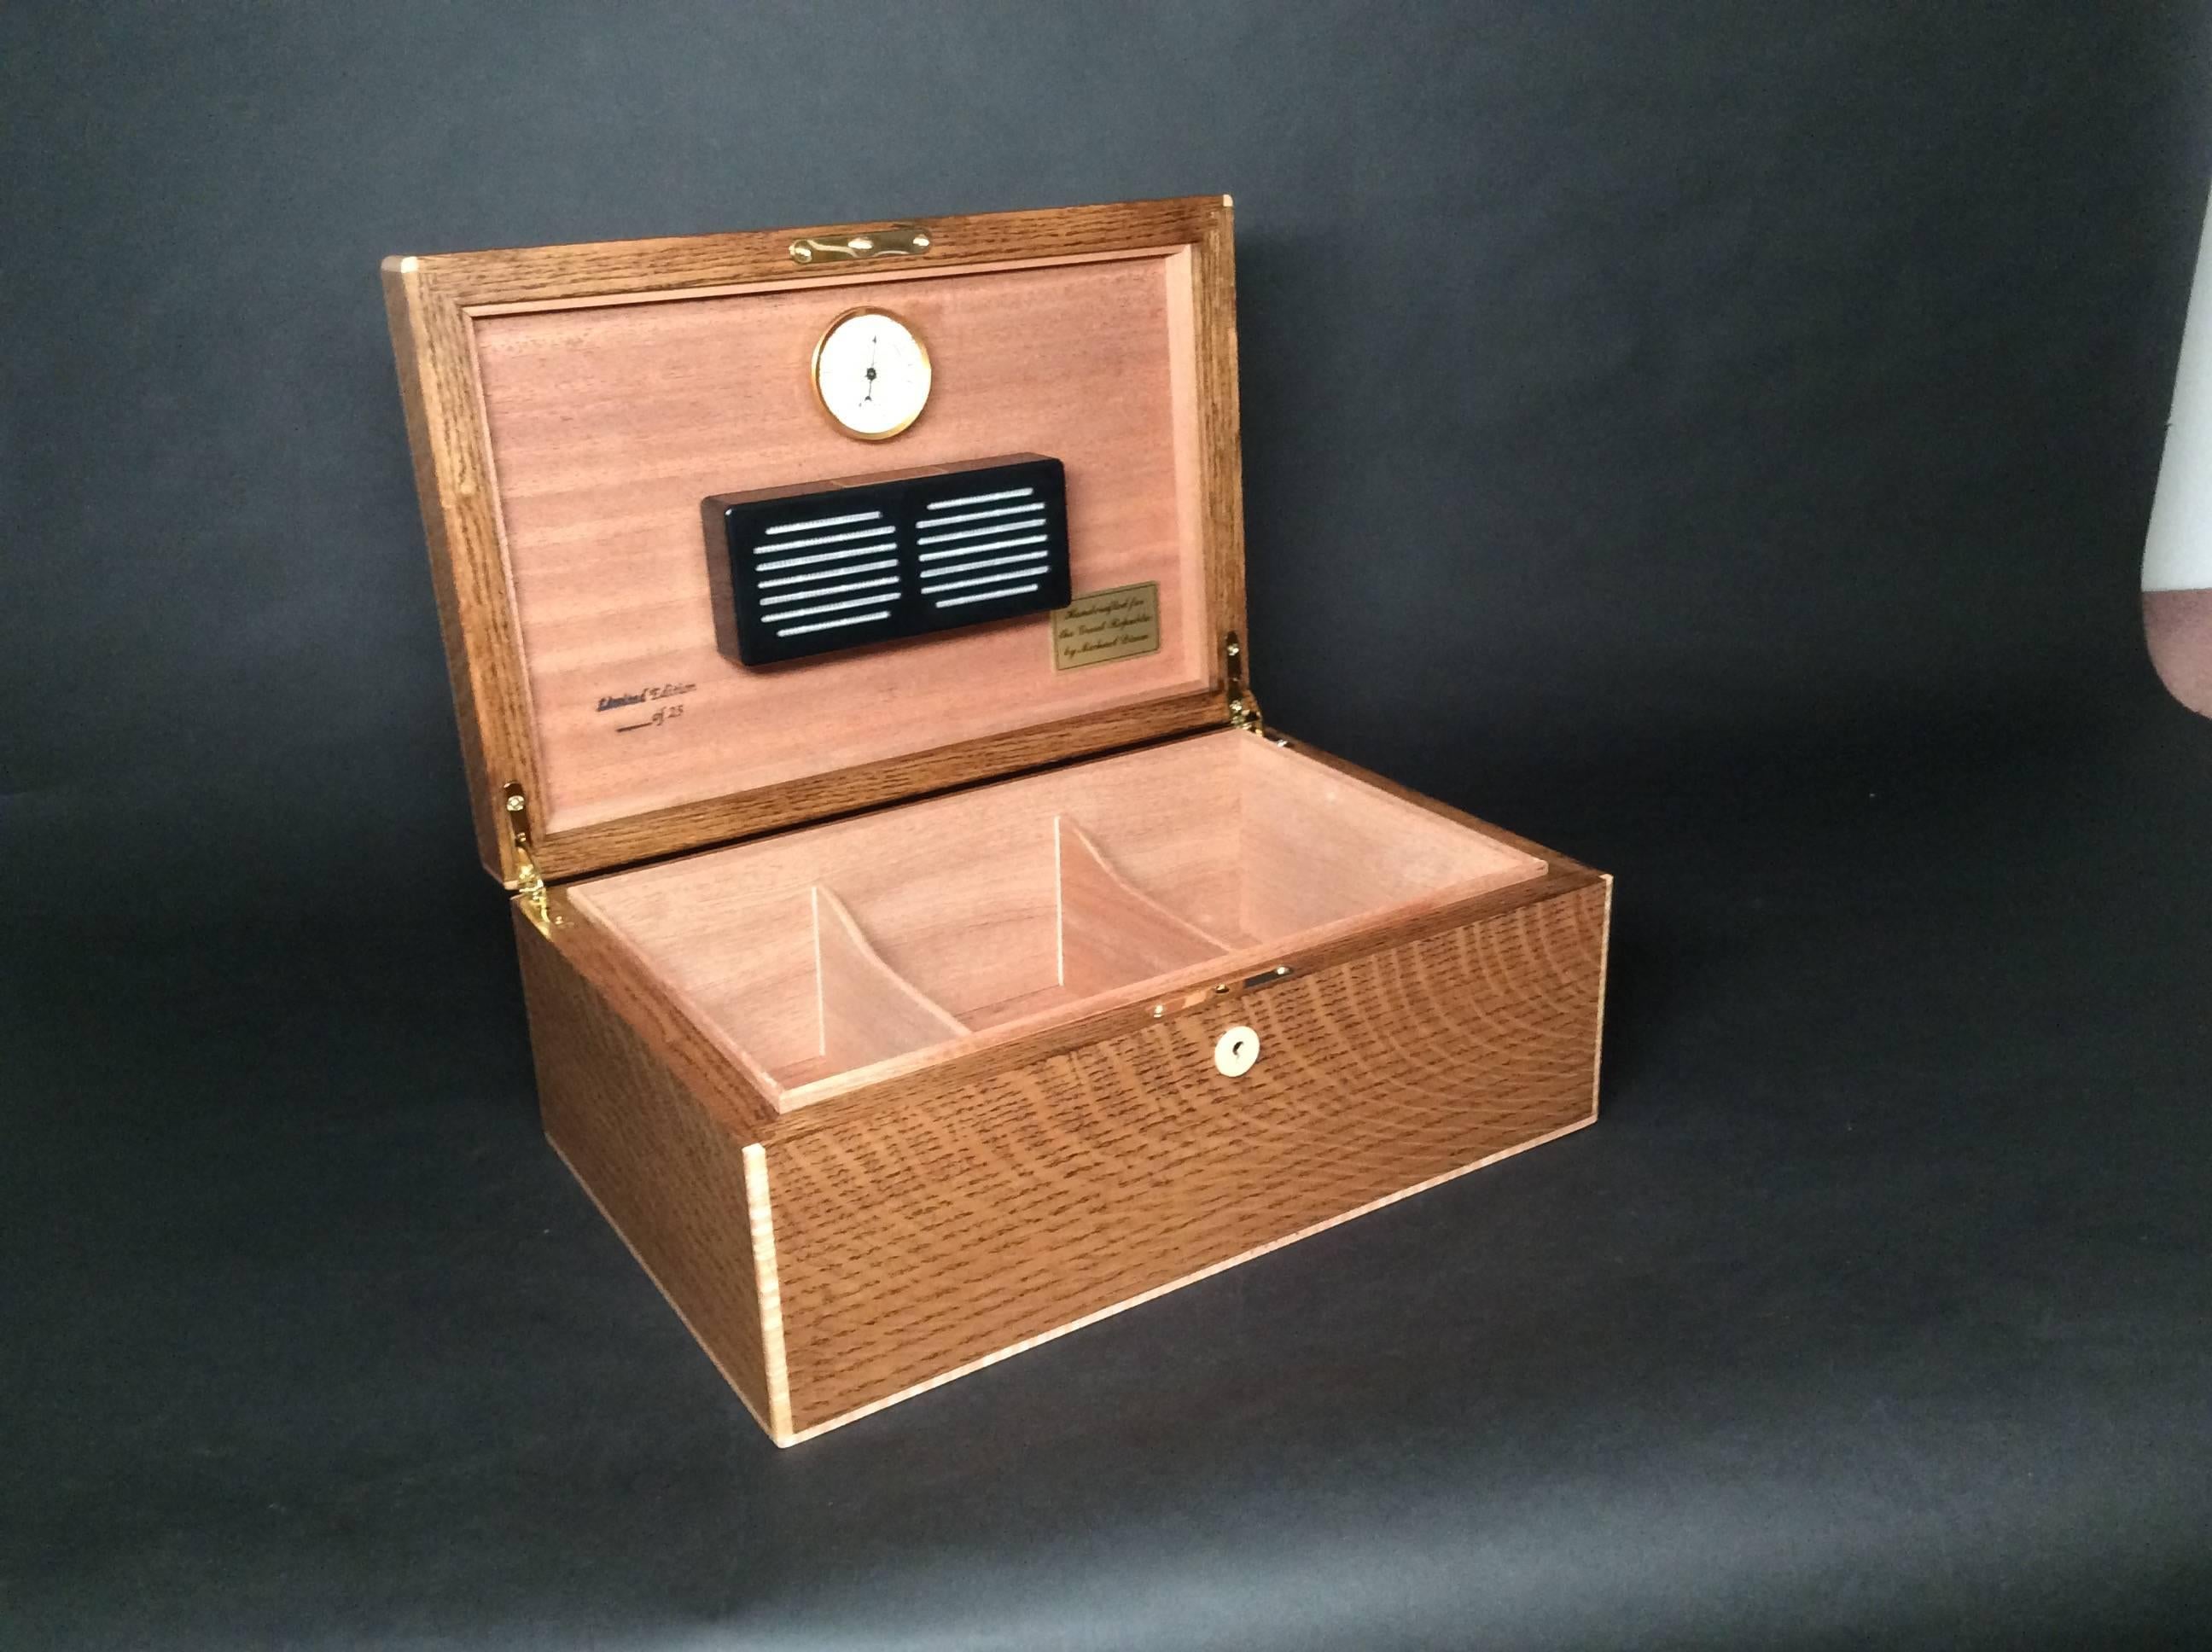 A handsome handcrafted cigar humidor, made from “rift sawn” white oak. This humidor is an exclusive product to The Great Republic, created in a limited edition of only 25. The lid of this distinctive humidor is hand-stamped with a seal of George